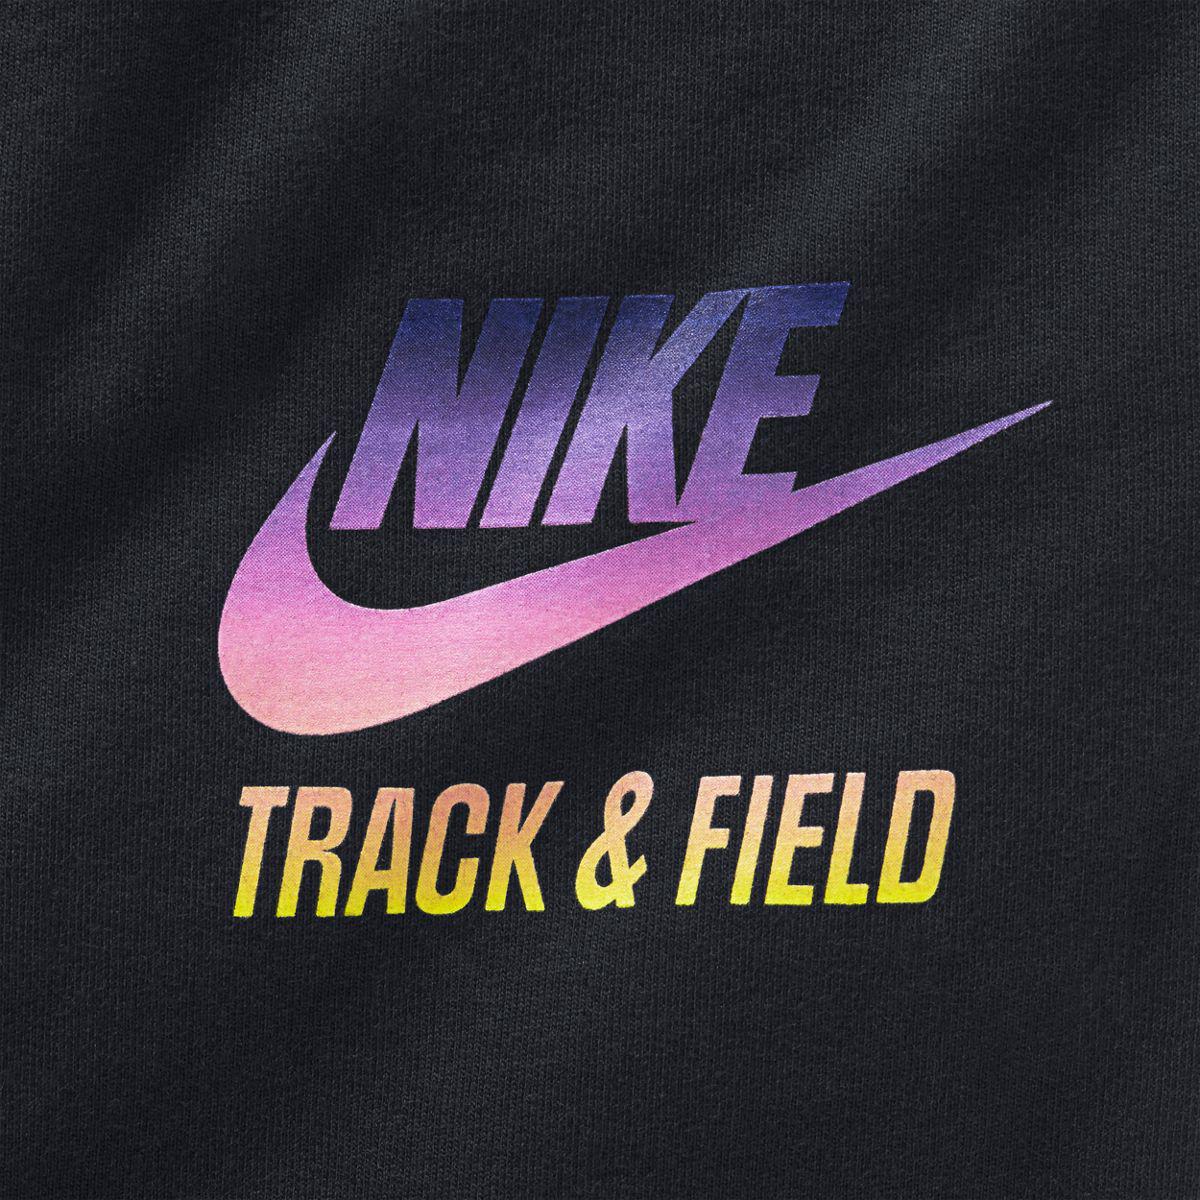 Nike tracking. Nike track and field. Nike track and field штаны. Nike track field SP 1507. Nike track and field толстовка.